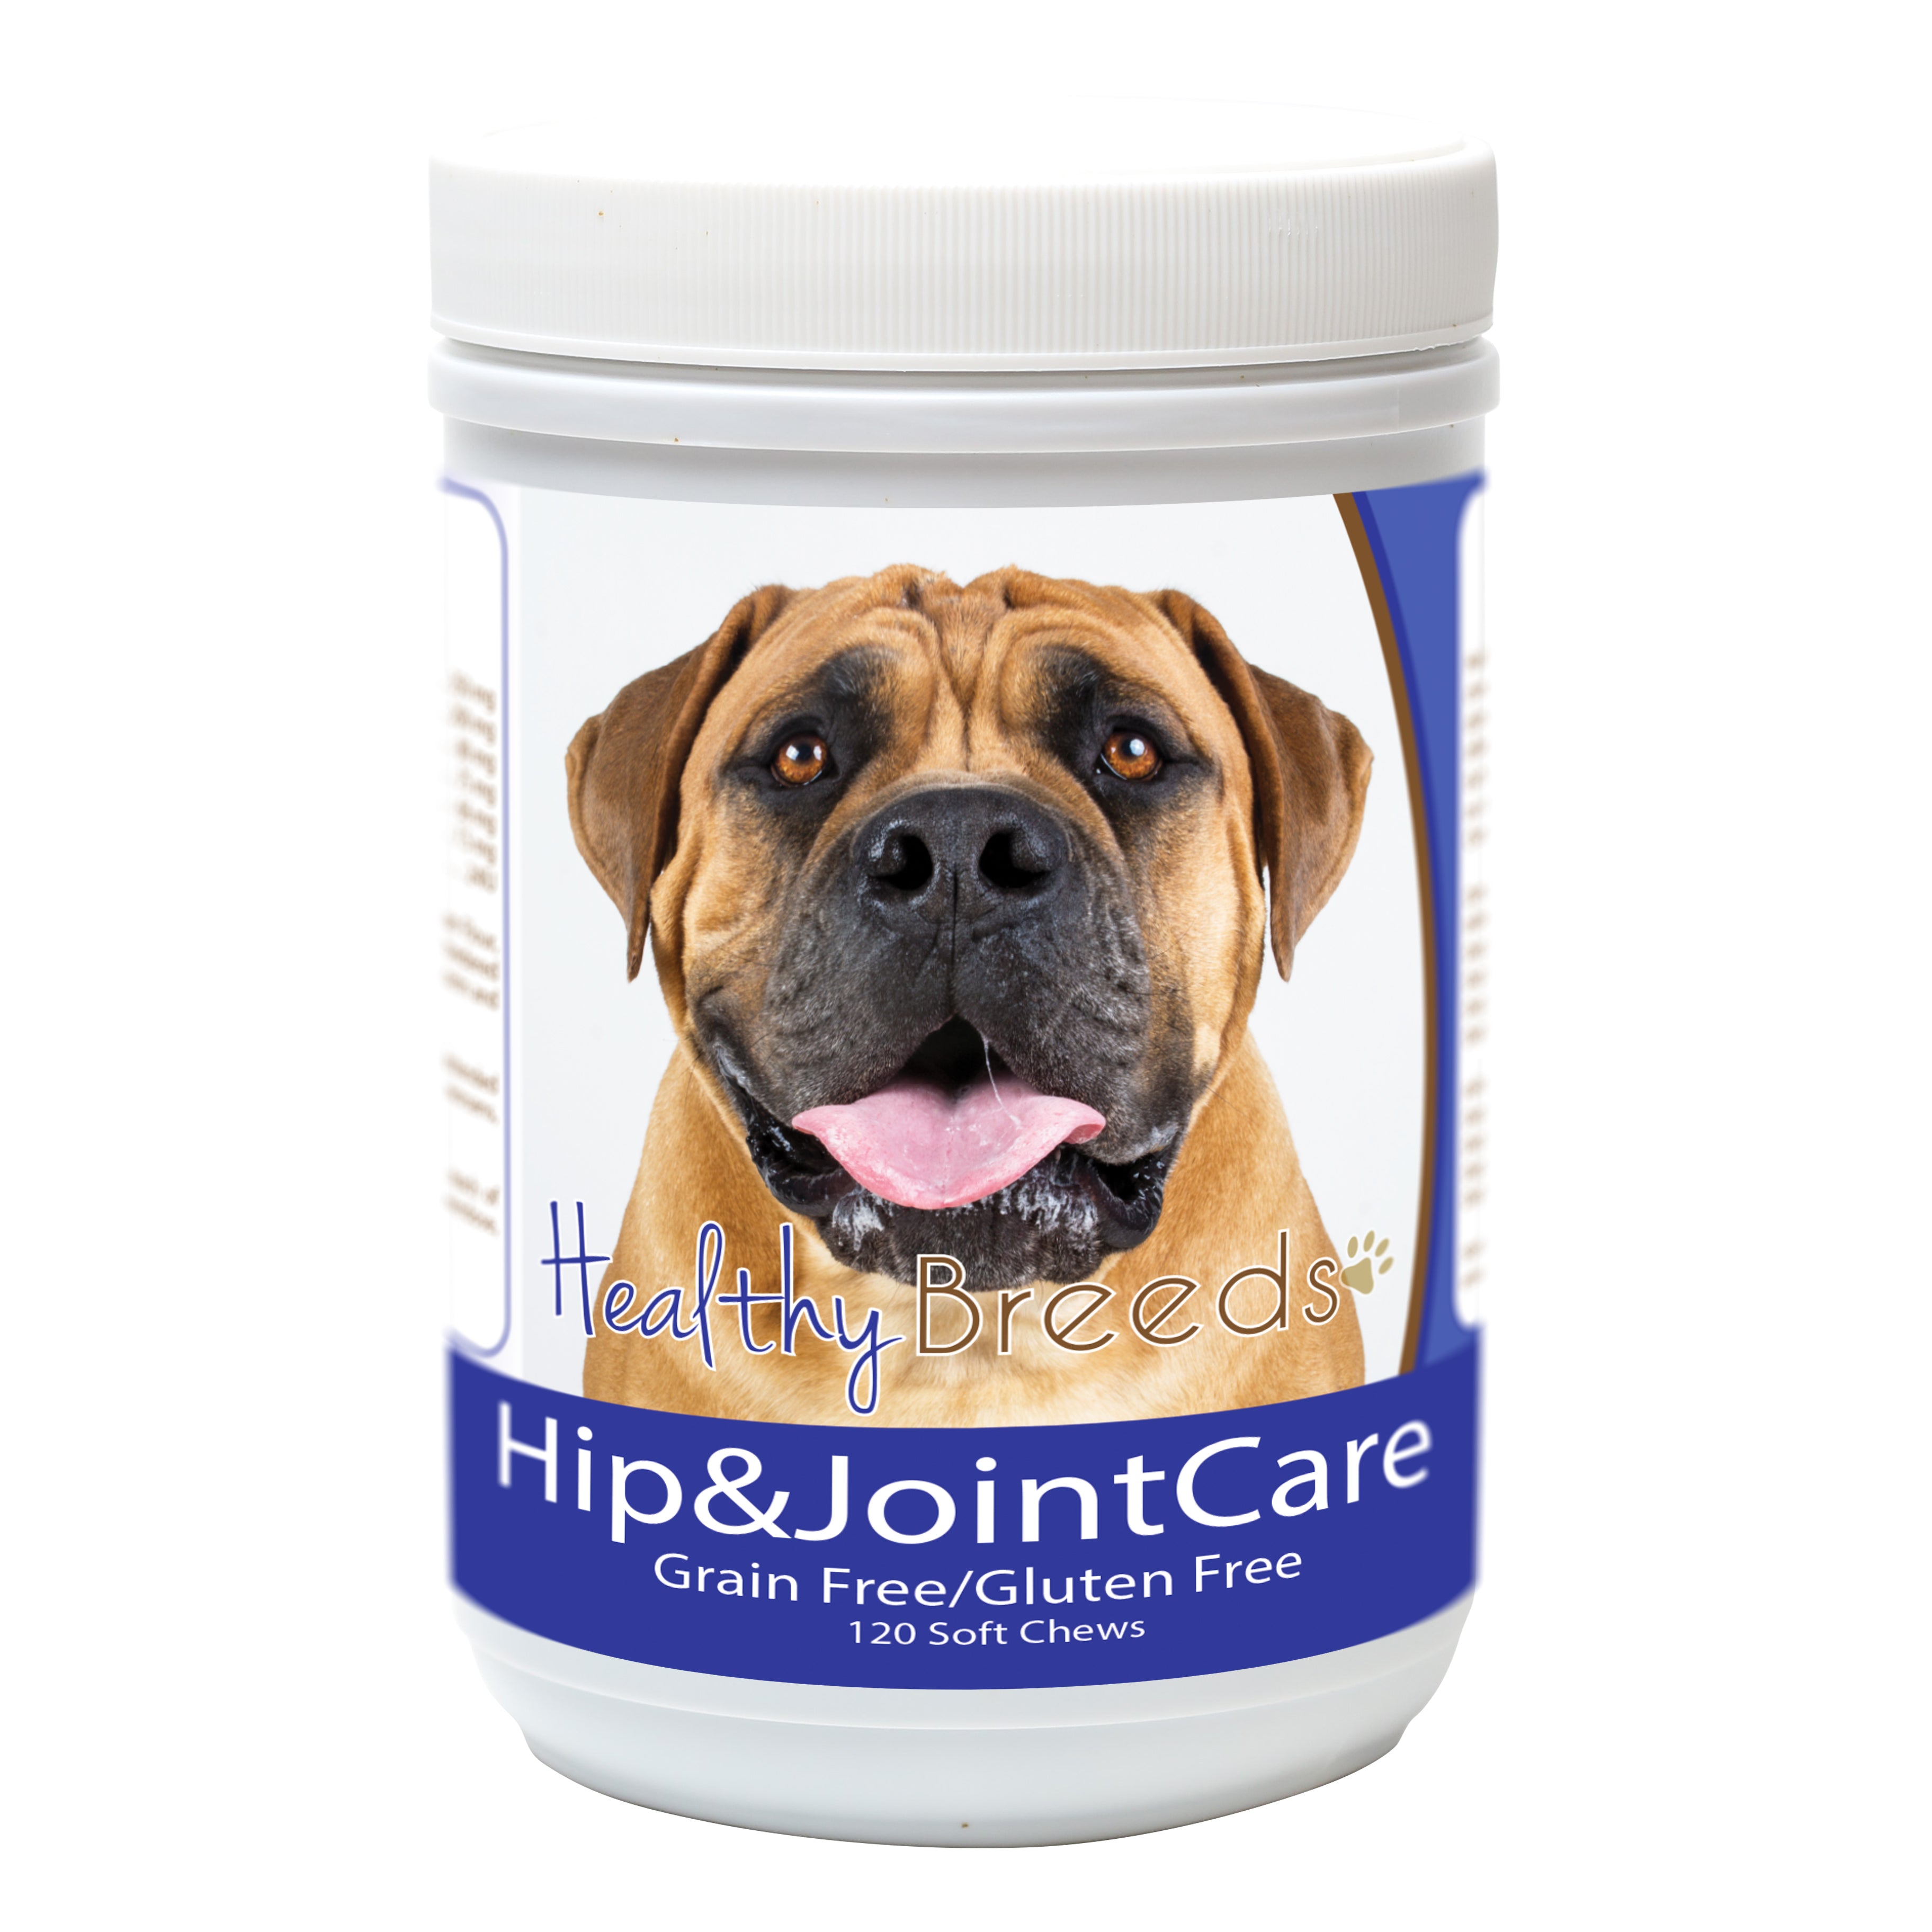 Boerboel Hip and Joint Care 120 Count